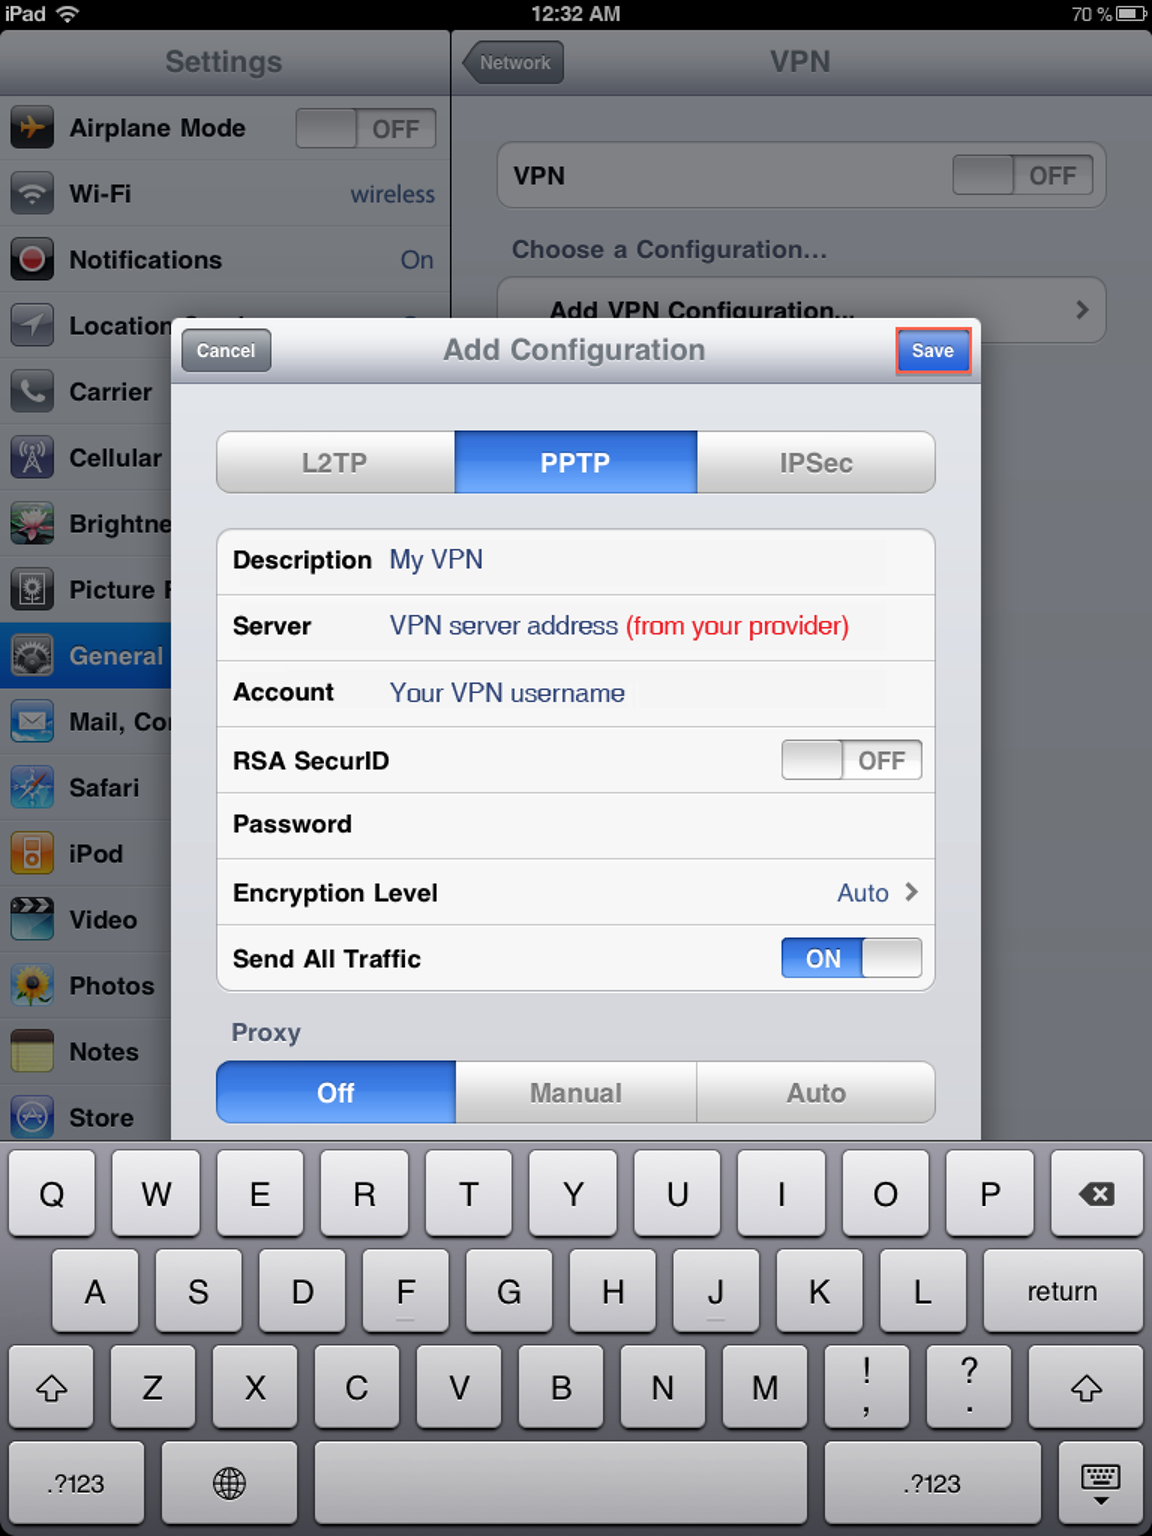 what is vpn on ipad means